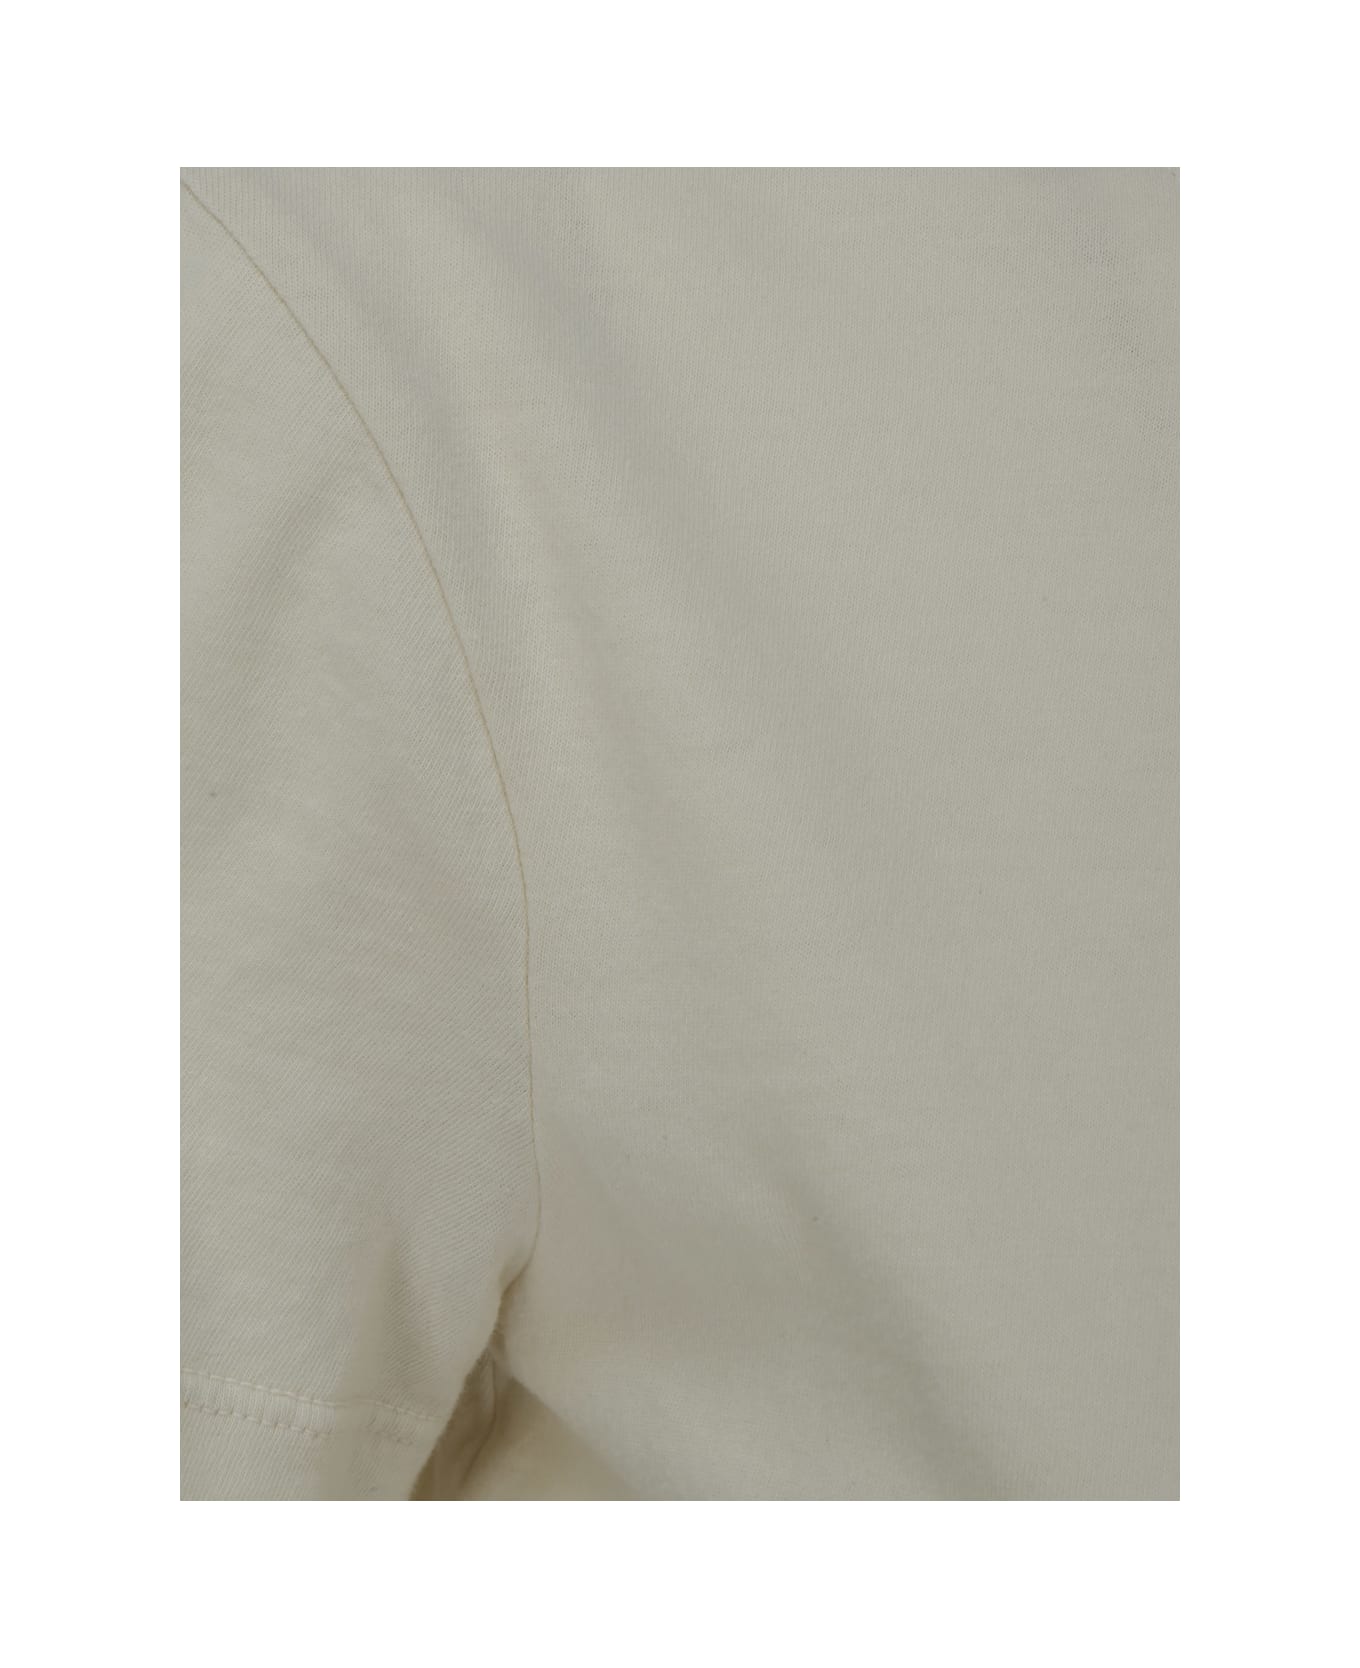 James Perse Vintage T-shirt - Marshmallow Tシャツ